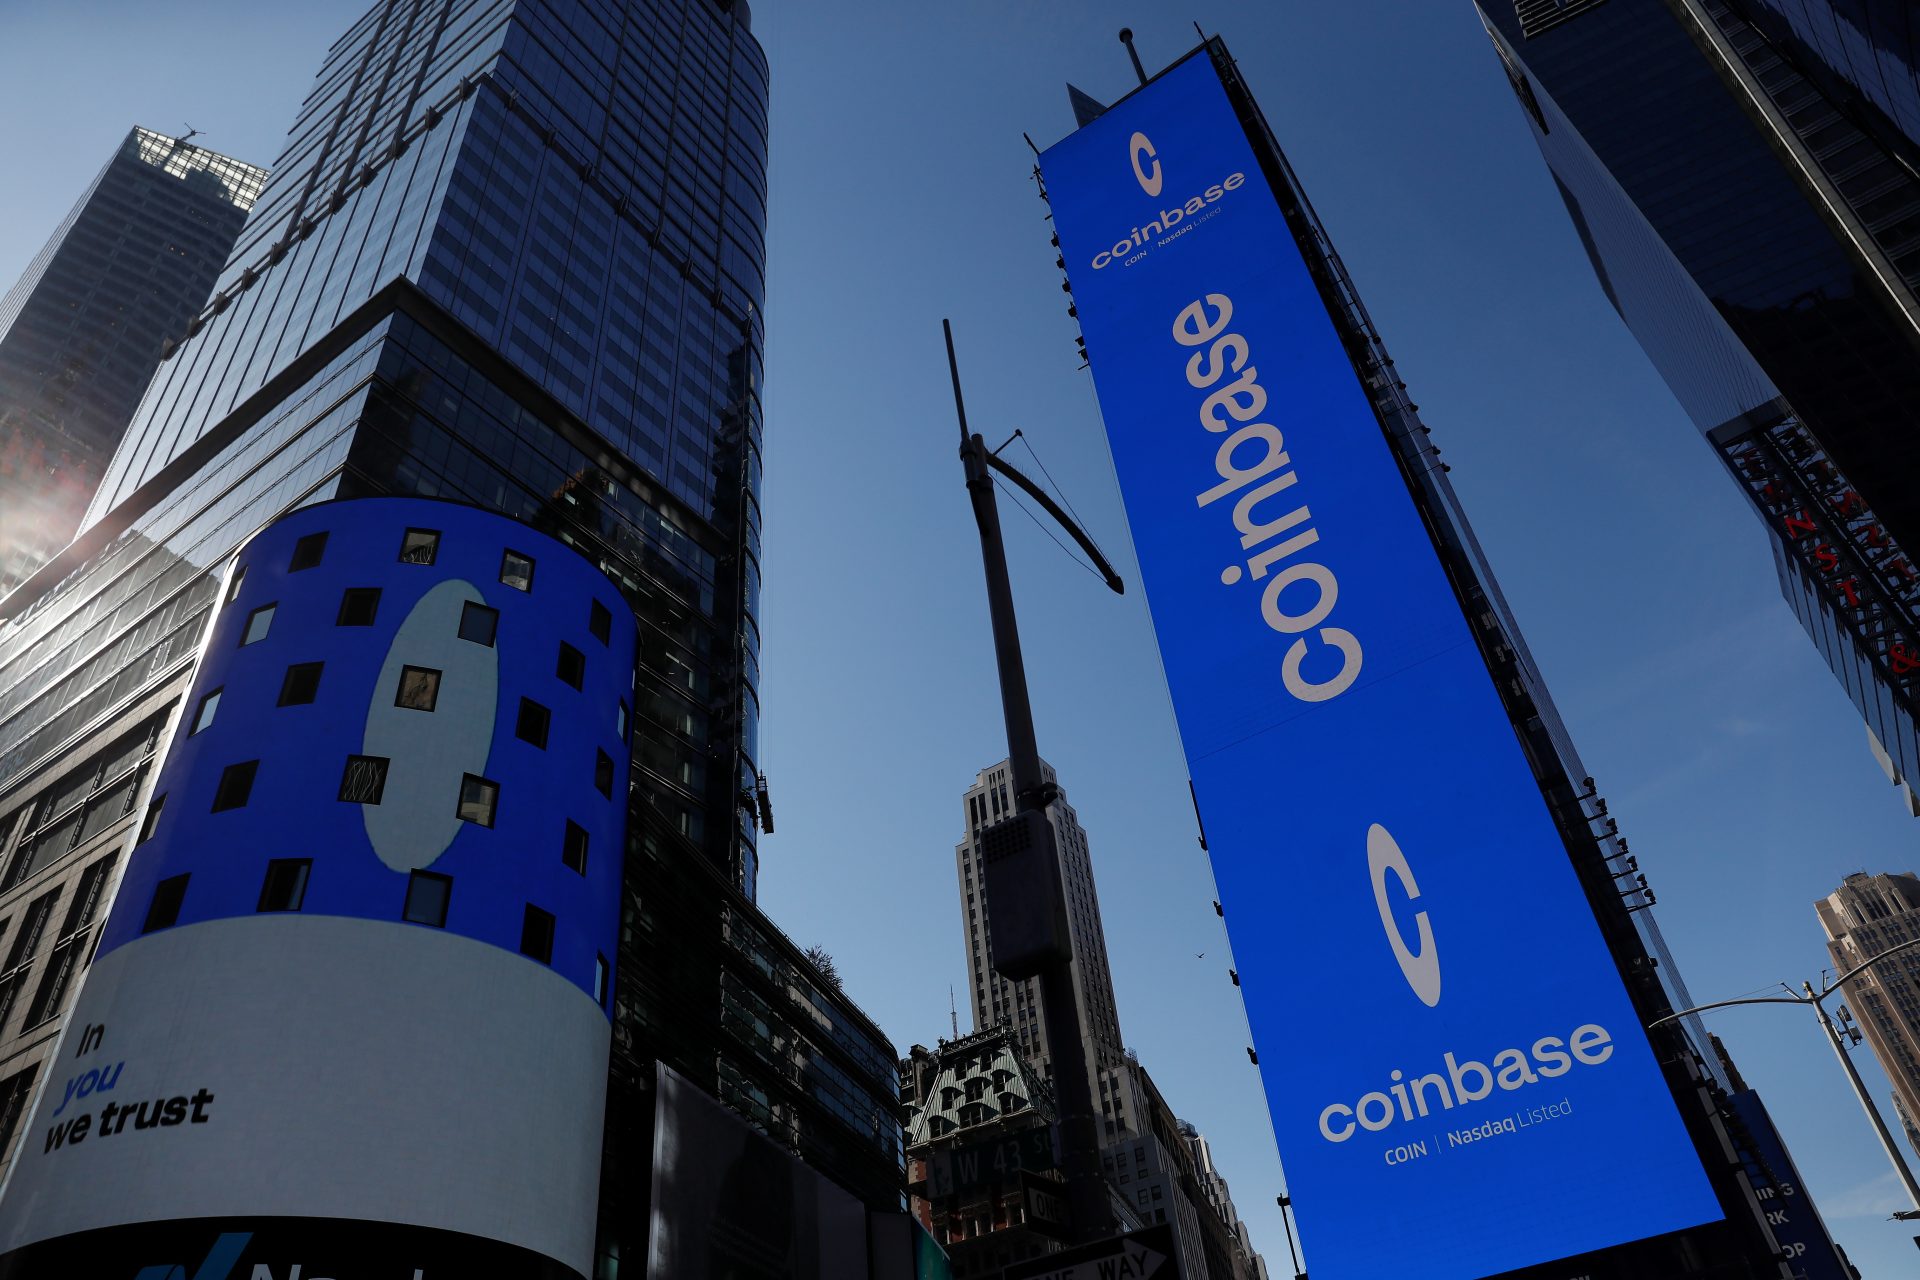 Coinbase mistakenly advised 125,000 users their 2FA settings had modified